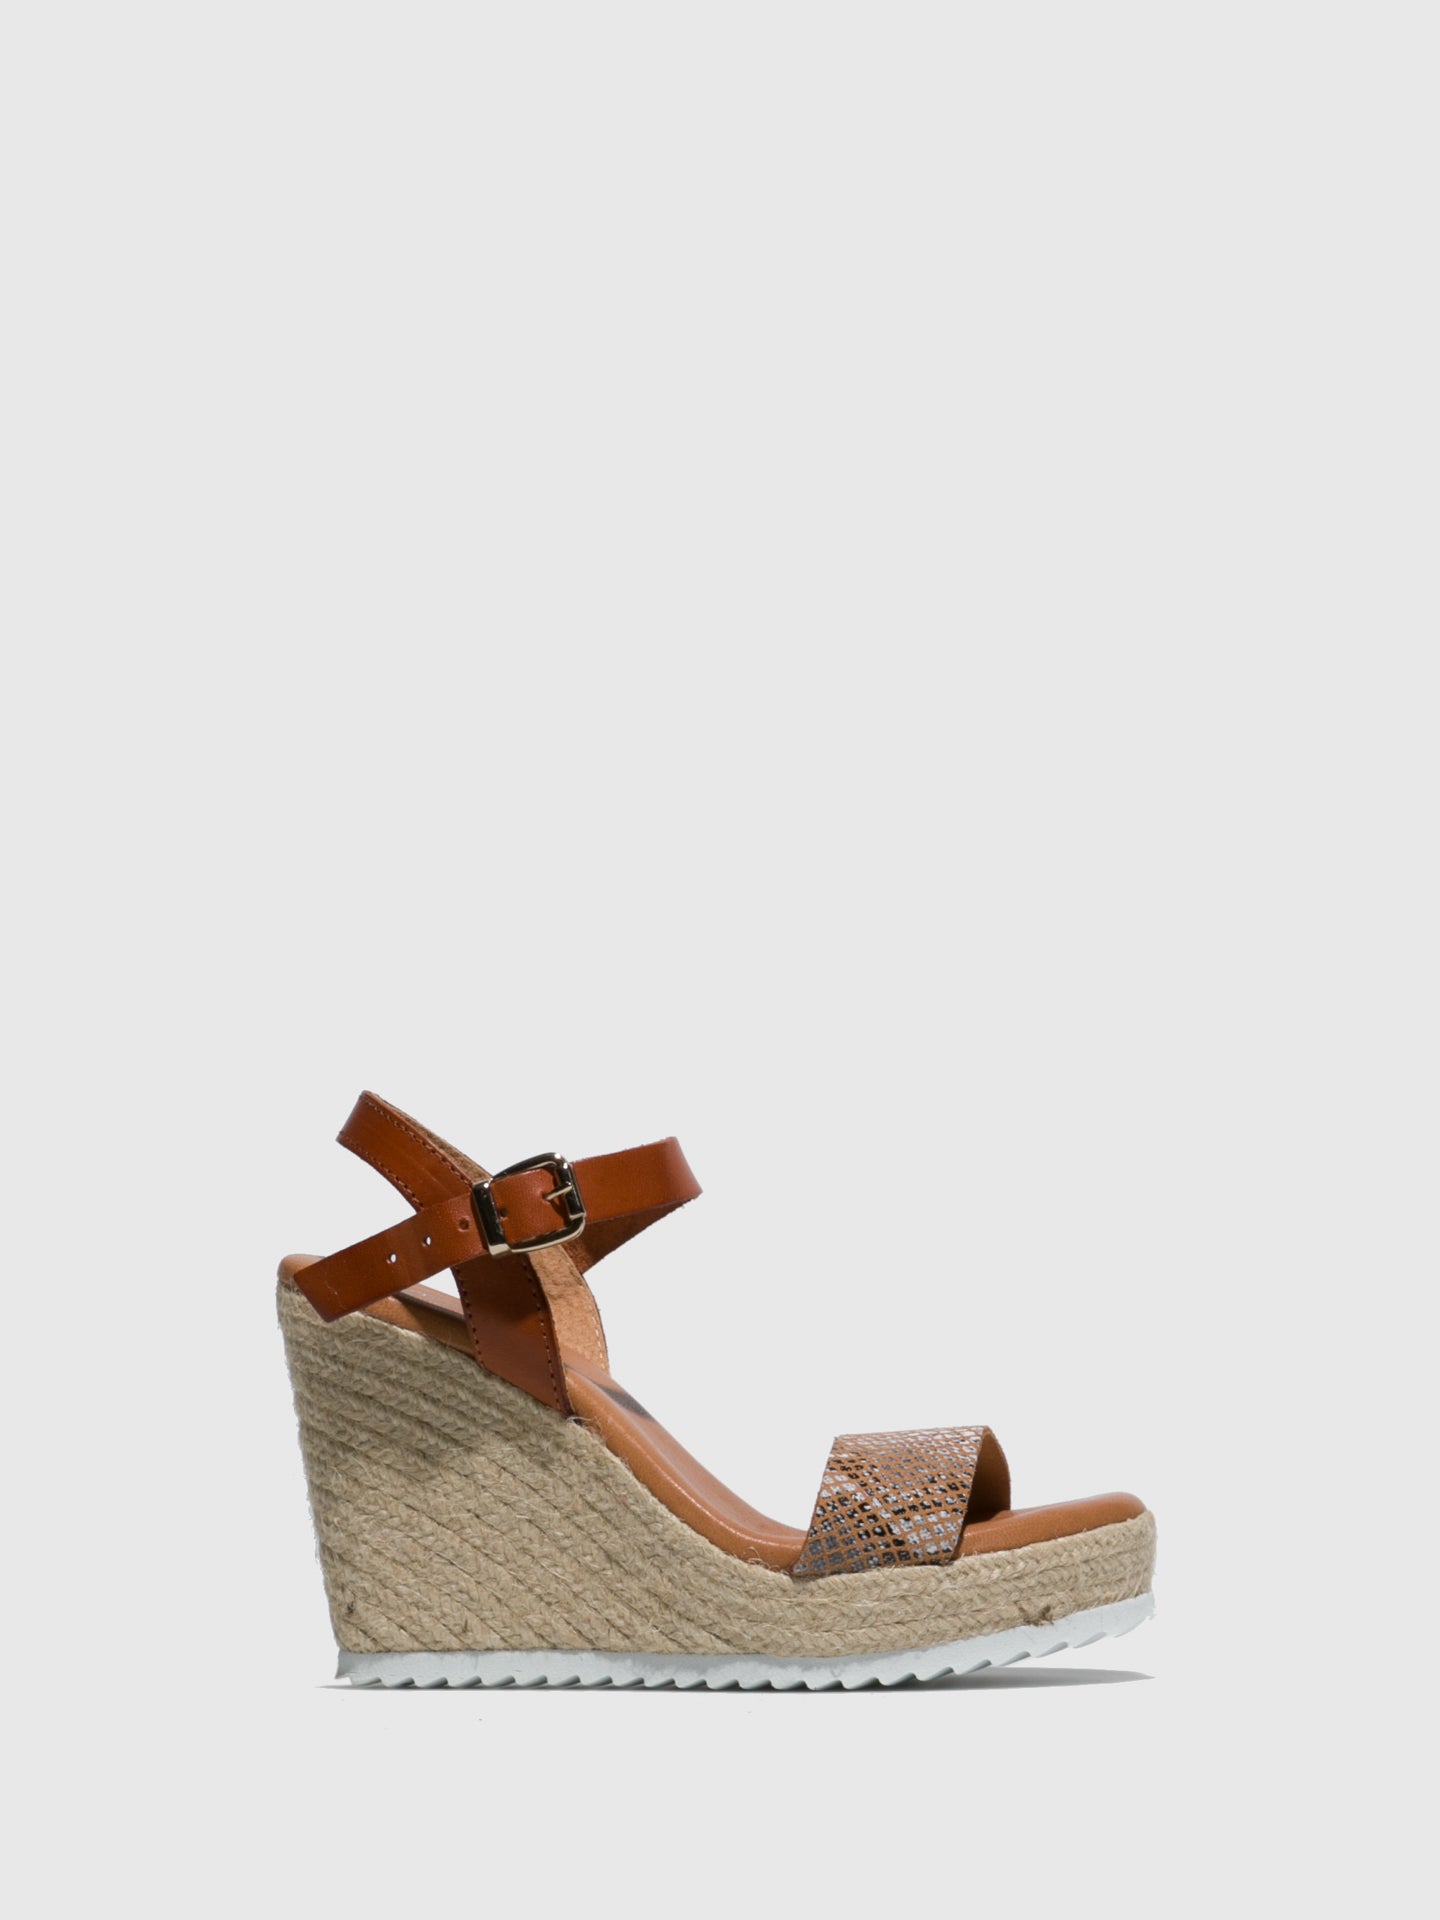 Sotoalto Brown Leather Wedge Sandals